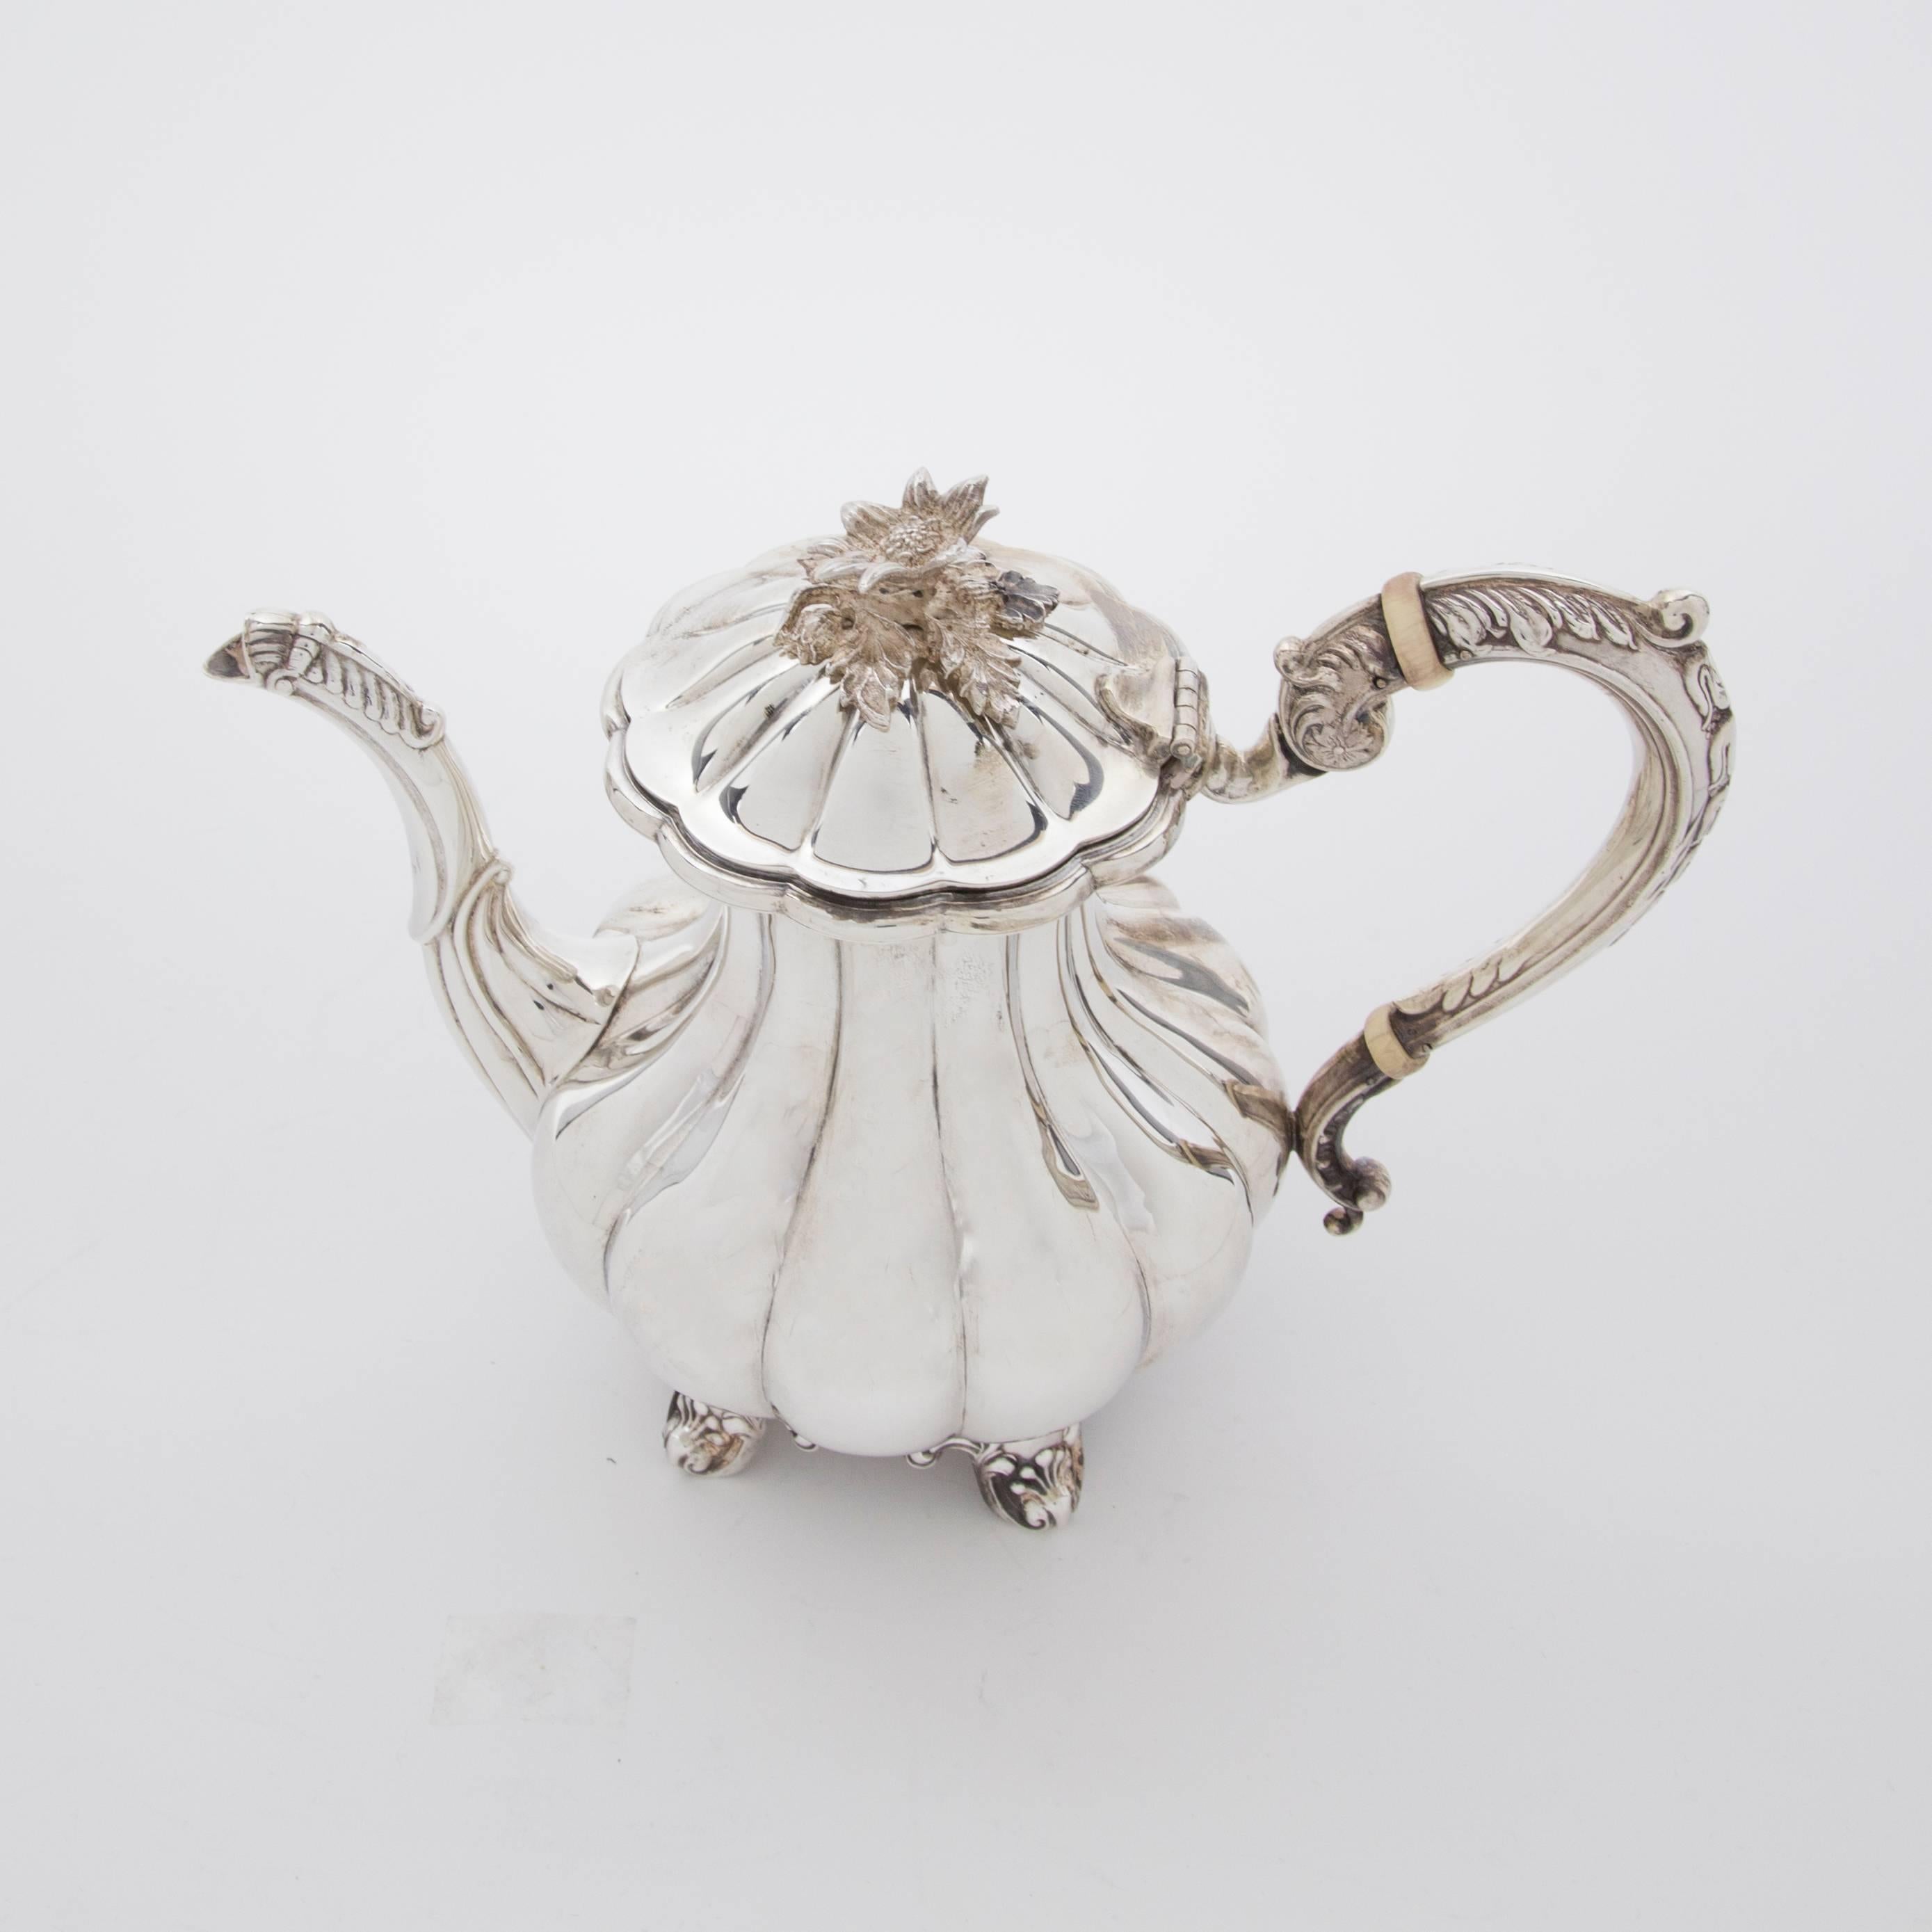 Four piece Birks sterling silver tea and coffee set in the ‘Melon’ pattern; comprising: One coffee pot approximate 9